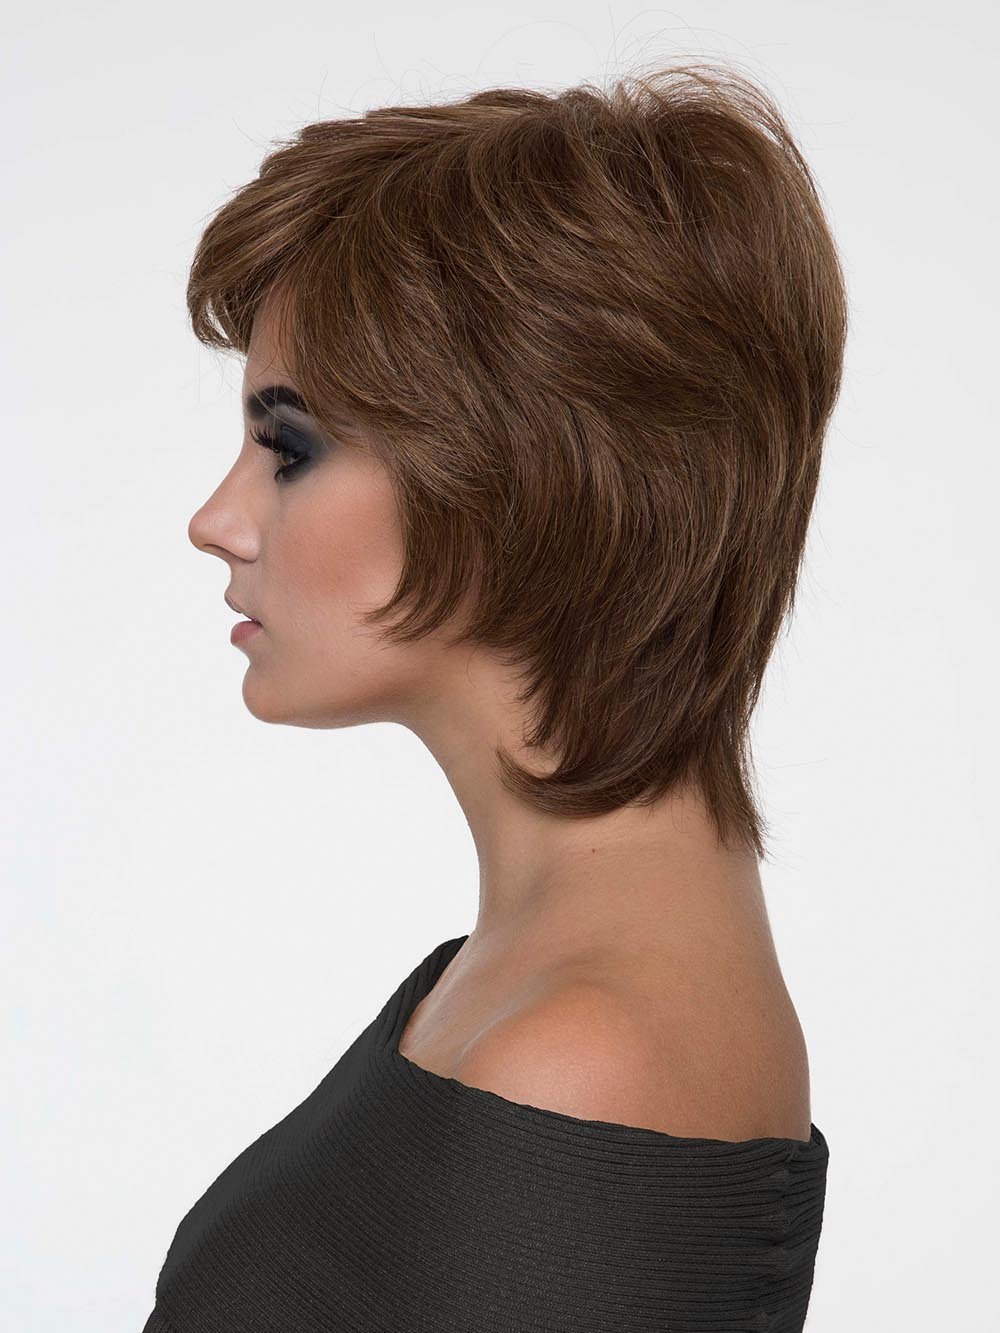 She's made with our exclusive Envyhair heat-friendly fiber blend in a Mono Top construction with hand-tied sides and back